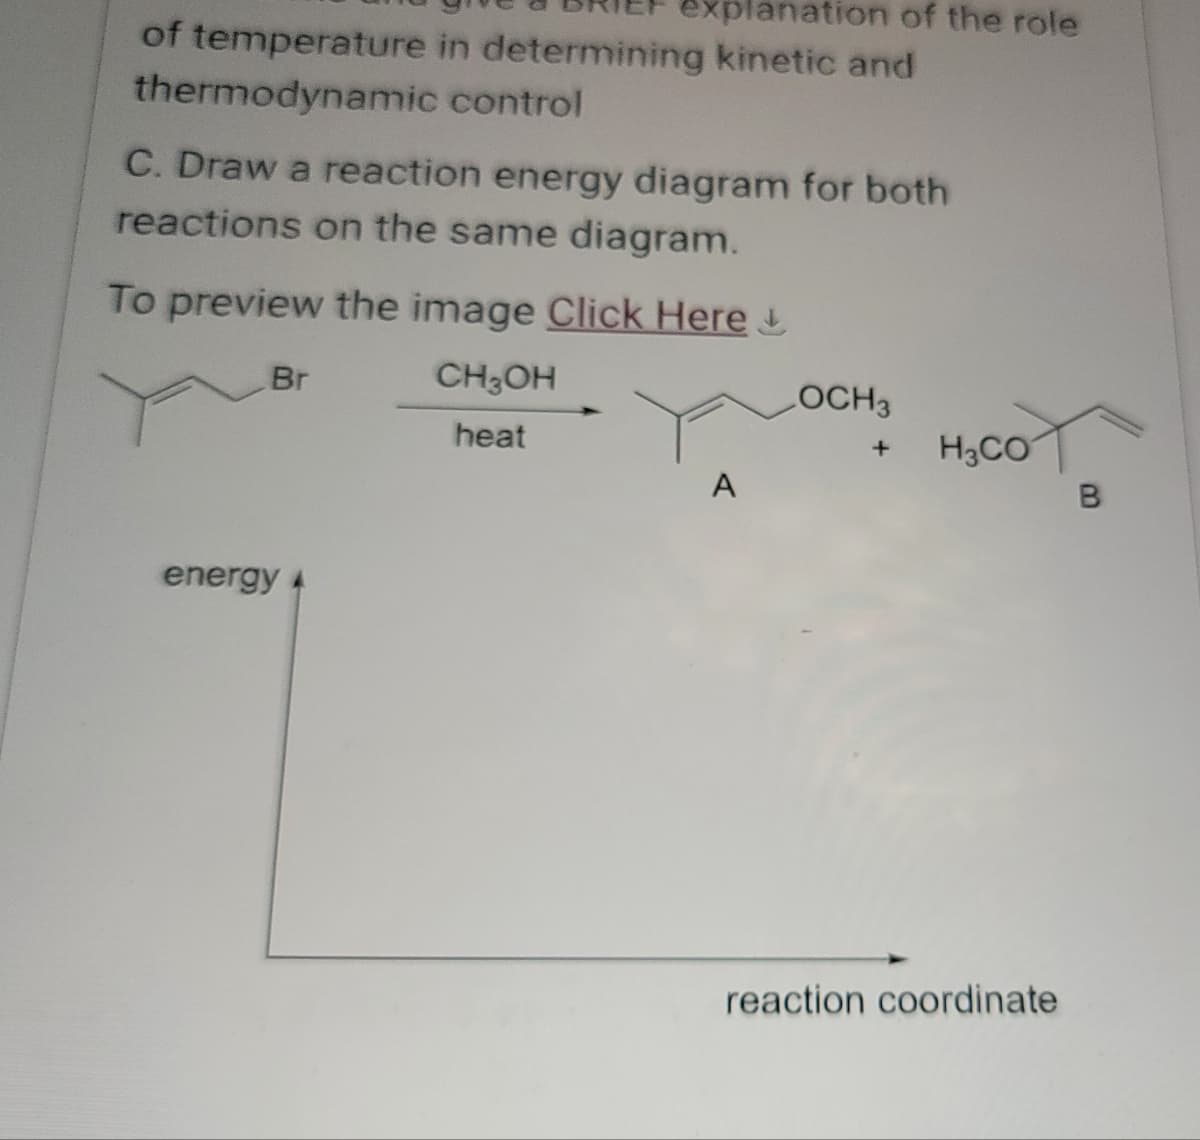 explanation of the role
of temperature in determining kinetic and
thermodynamic control
C. Draw a reaction energy diagram for both
reactions on the same diagram.
To preview the image Click Here +
energy
Br
CH3OH
LOCH3
heat
+
H3CO
A
B
reaction coordinate